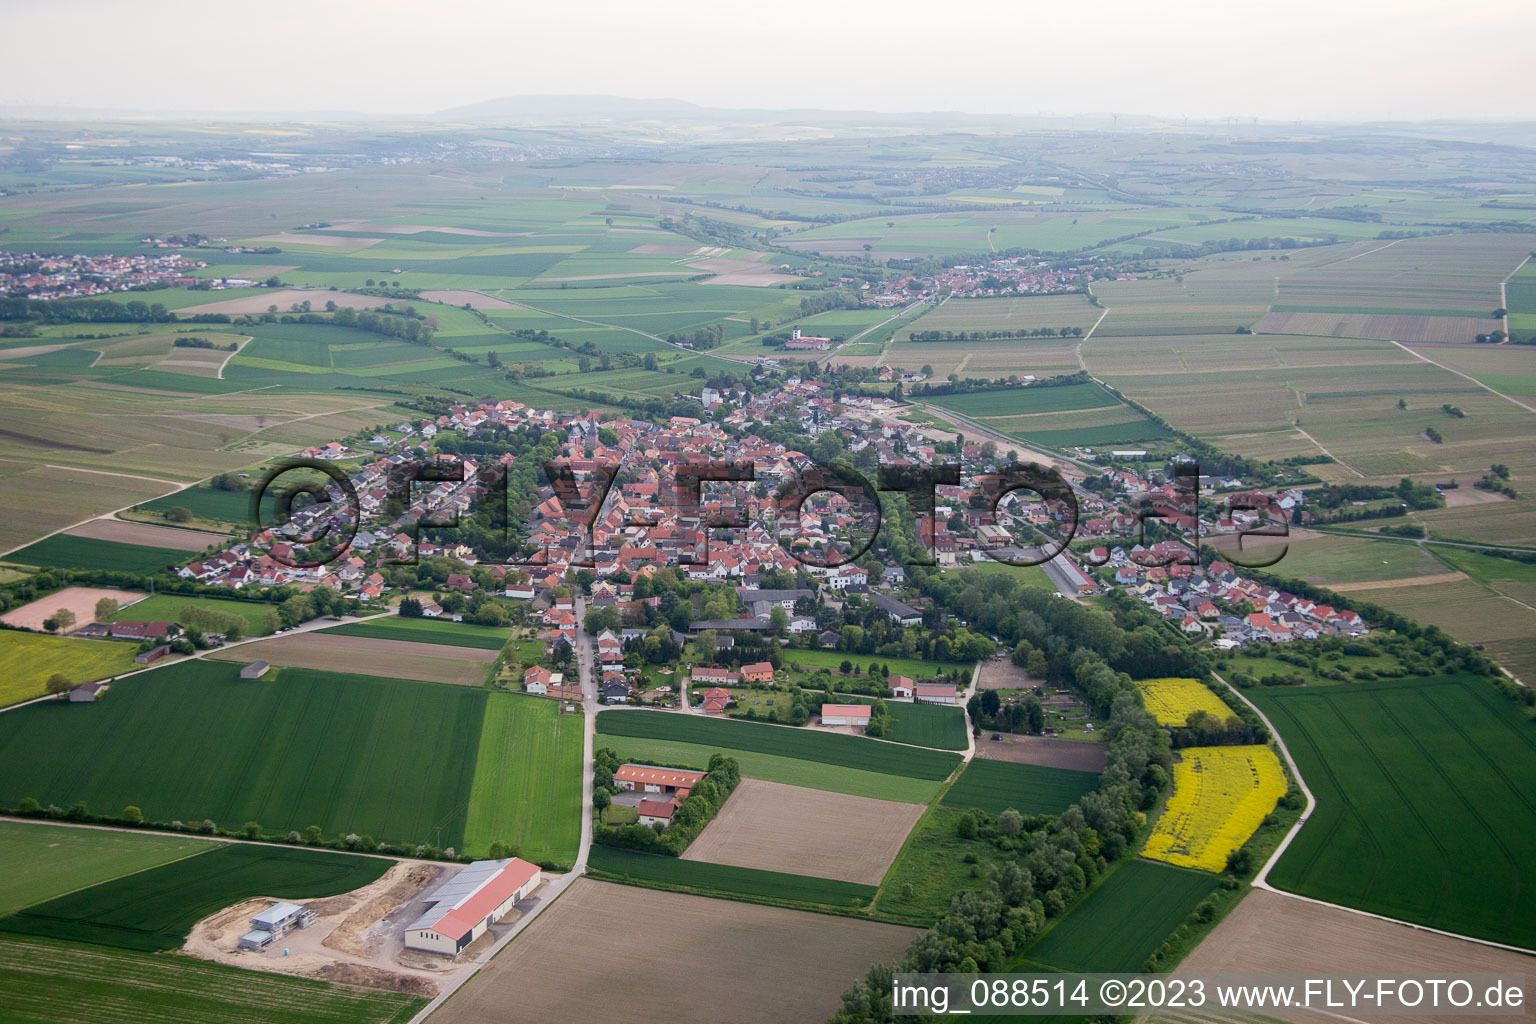 Aerial view of Bechtolsheim in the state Rhineland-Palatinate, Germany